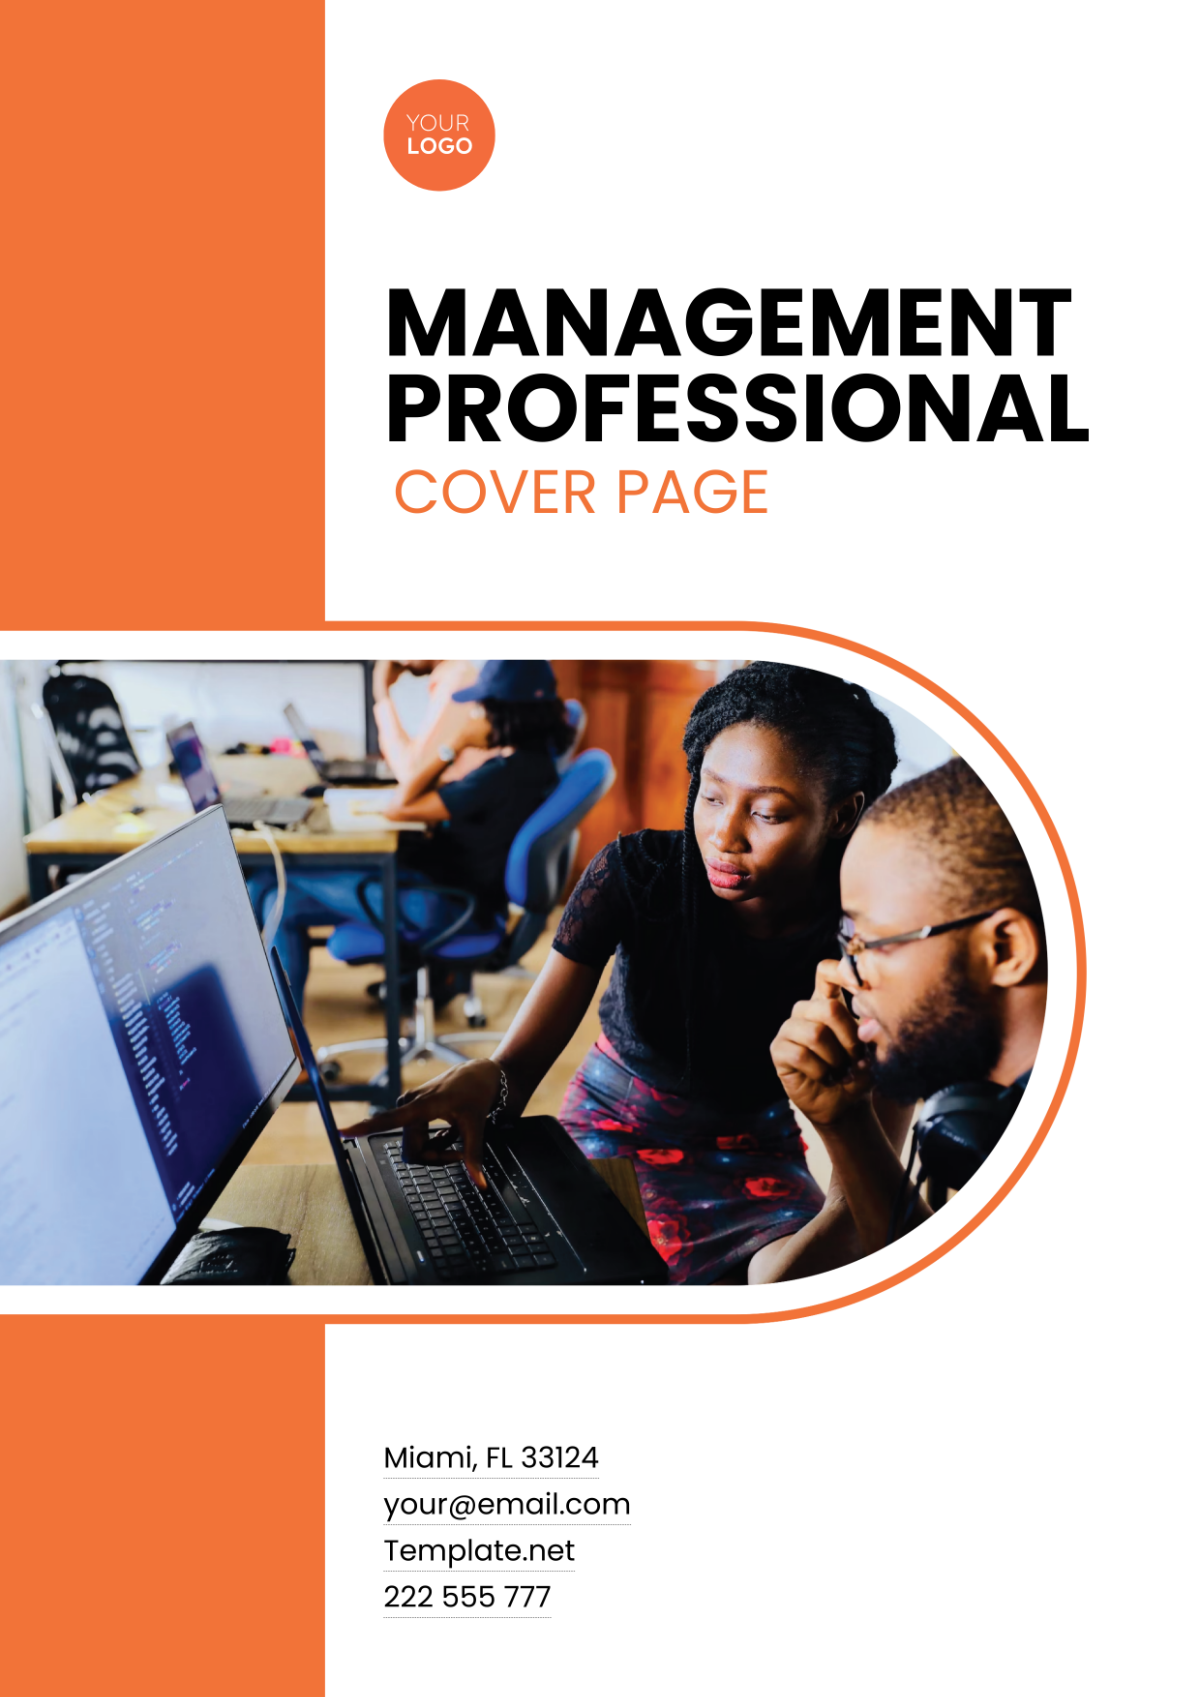 Management Professional Cover Page